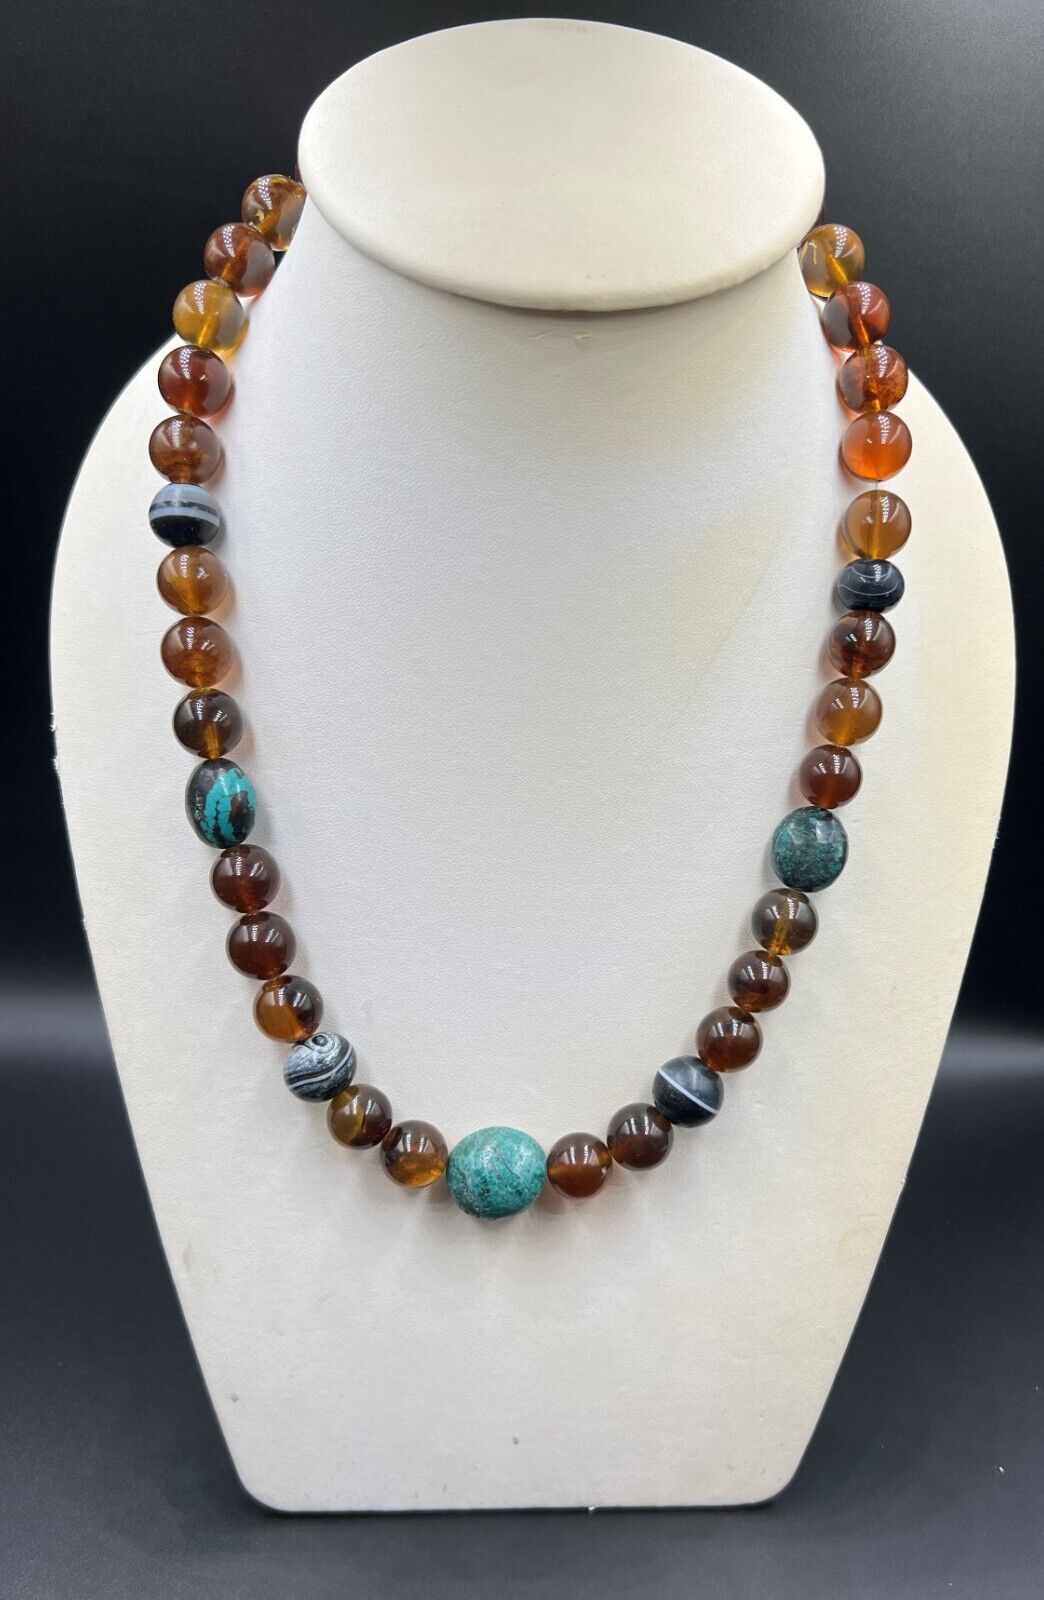 Necklace Vintage Himalayan Trible Jewelry Turquoise Amber Banded Agate Beads